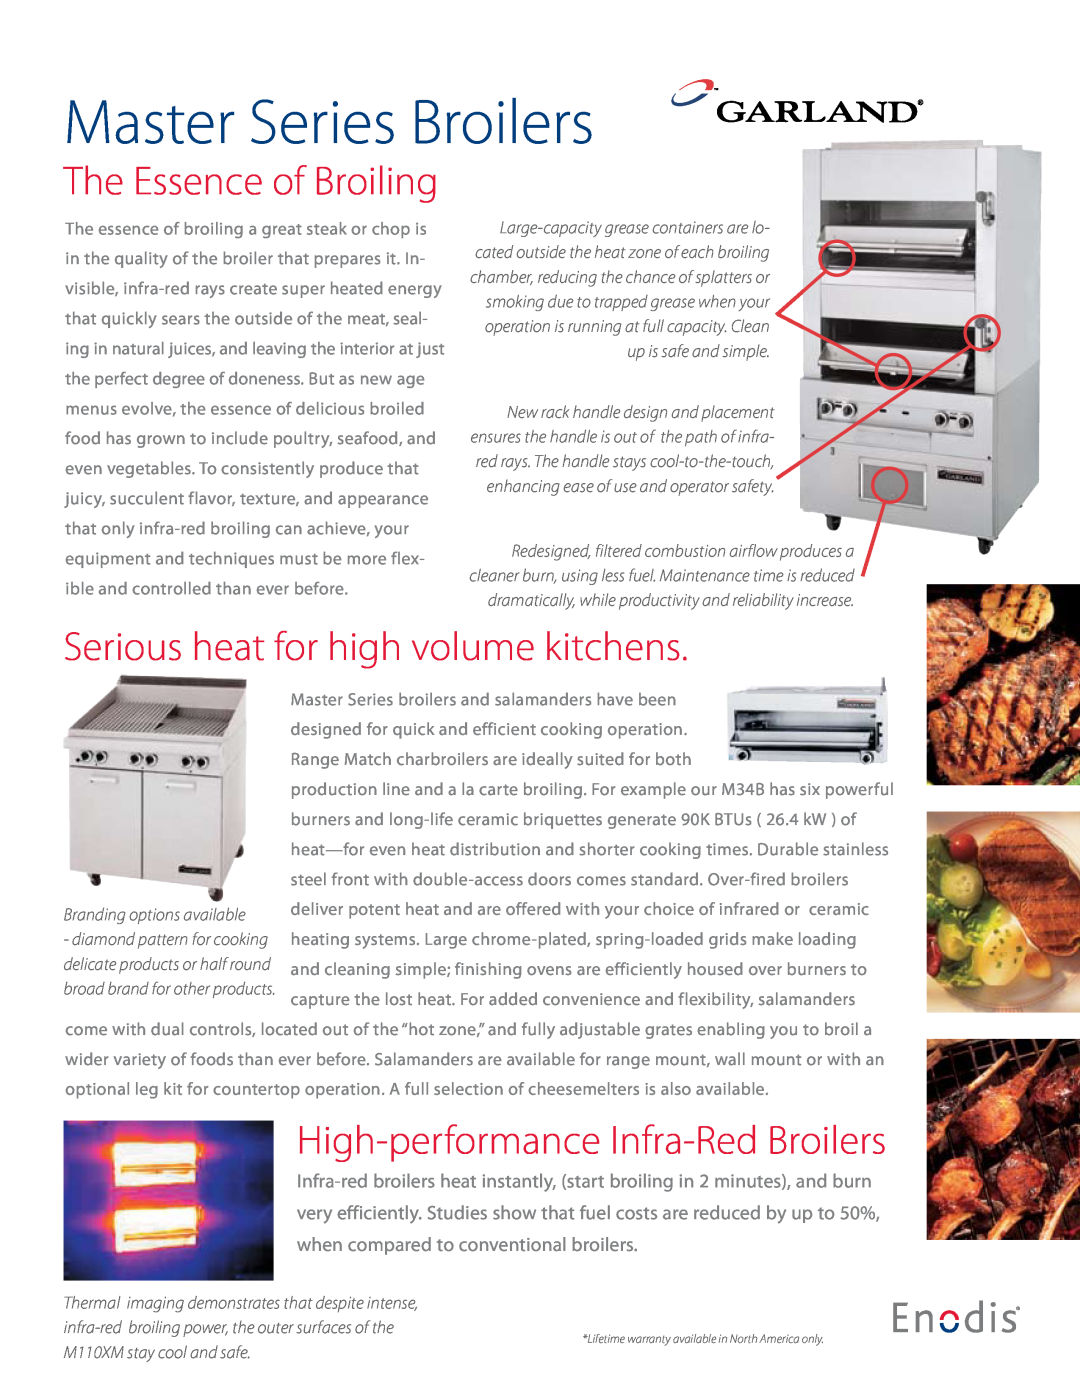 Garland manual Master Series Broilers, The Essence of Broiling, Serious heat for high volume kitchens 